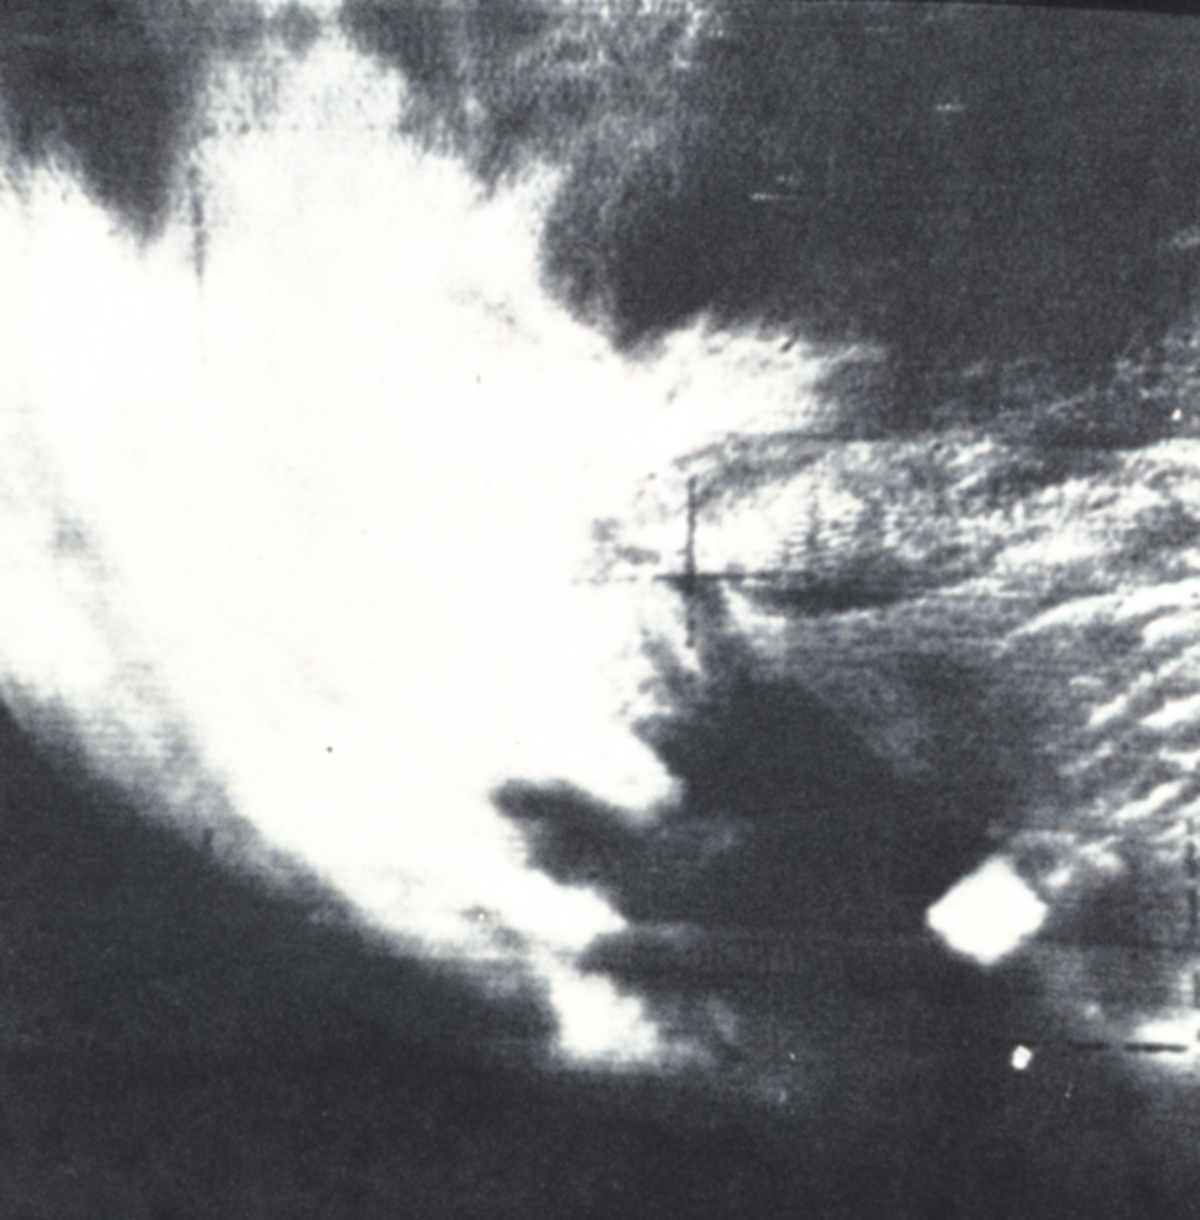 Among the most famous of early satellite weather photographs